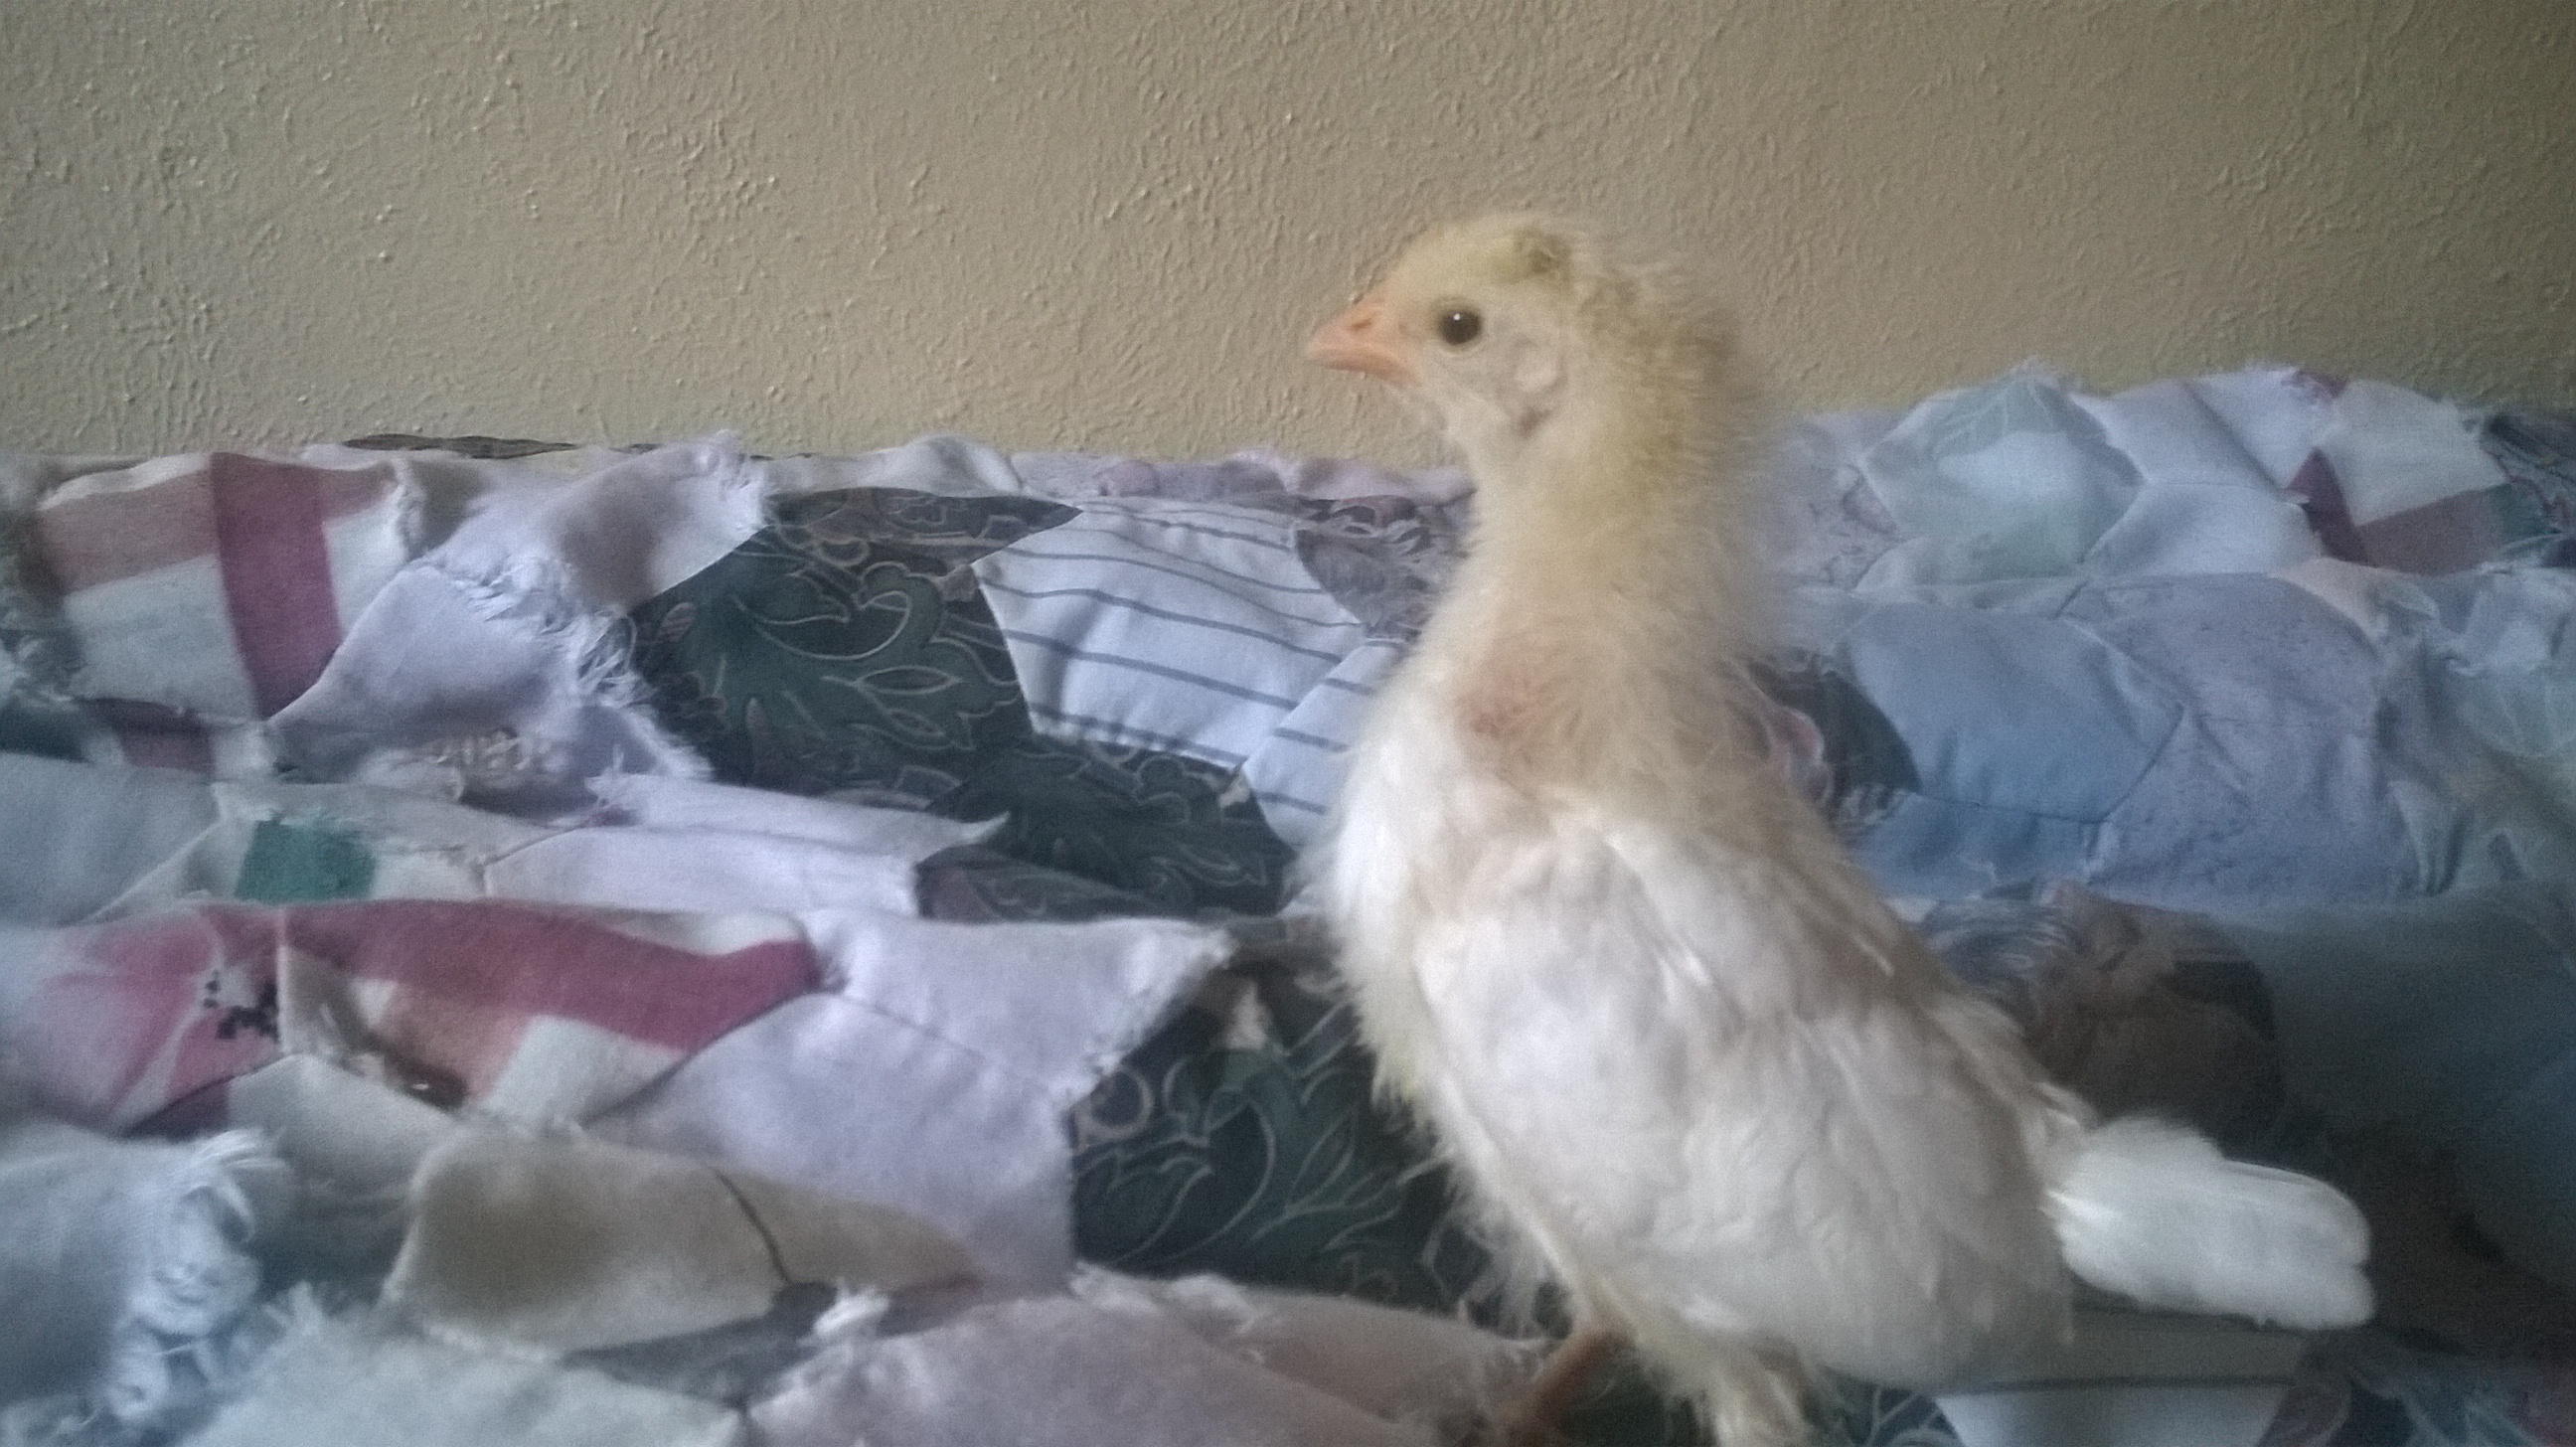 This is Ethel at age 19 days White Leghorn.